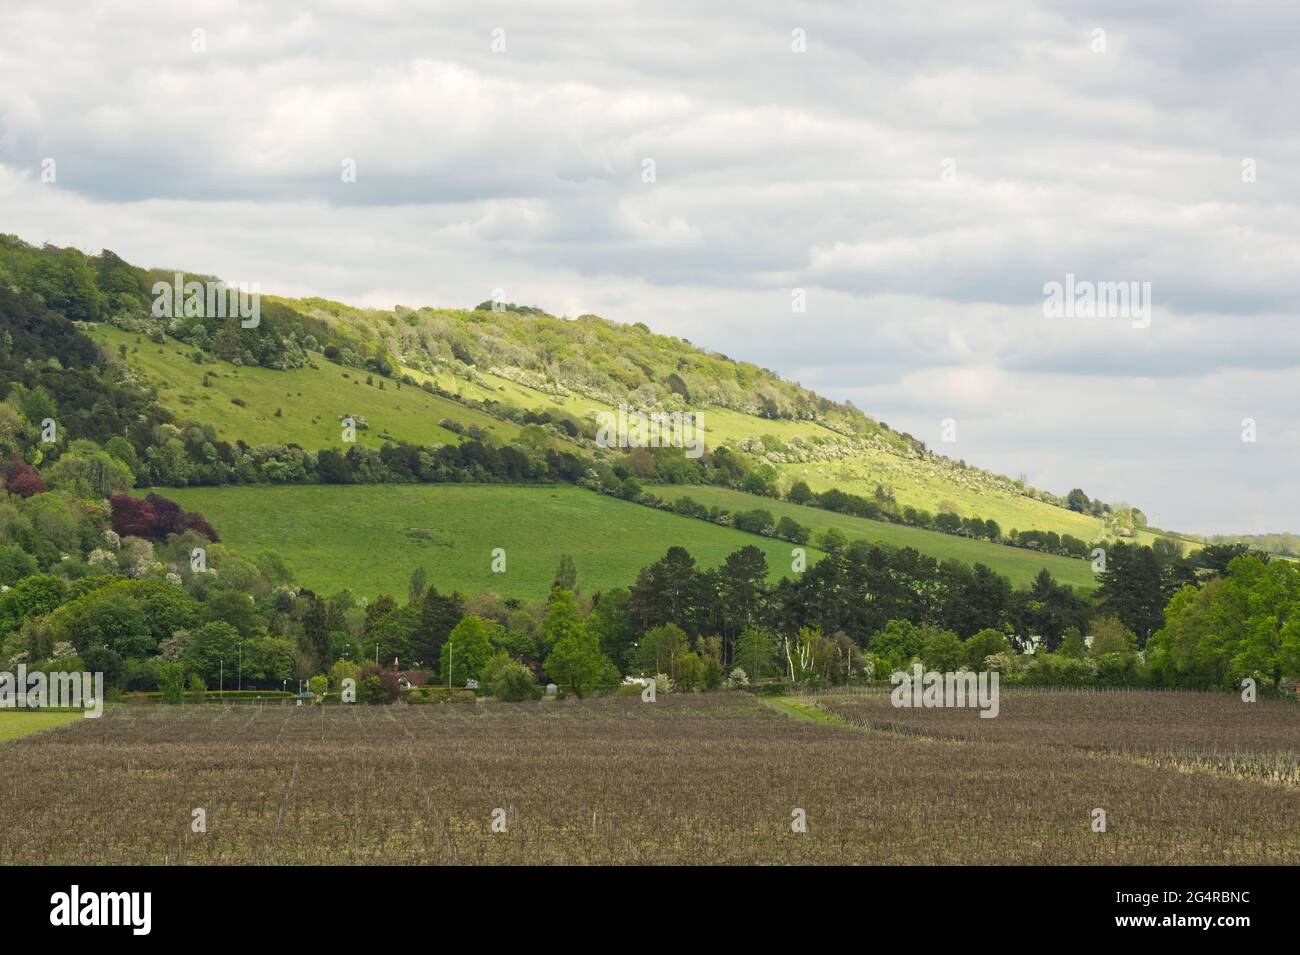 North Downs hillside at Dorking, Surrey, England. With vineyard in foreground. Stock Photo